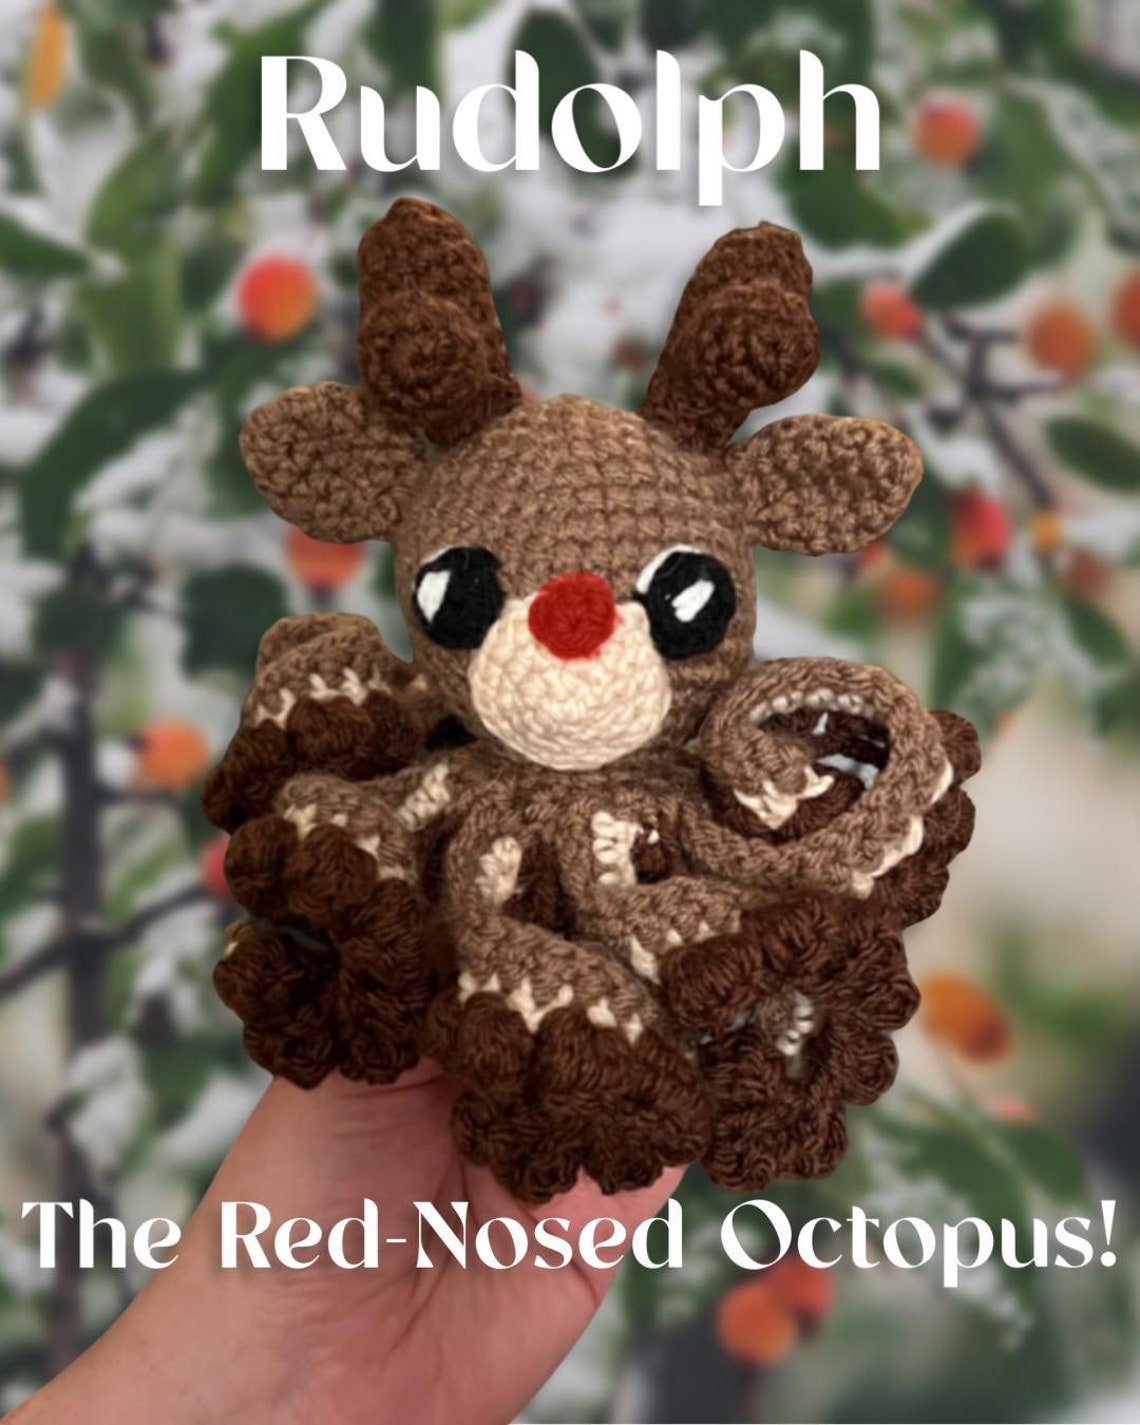 Crochet a Rudolph the Red-Nosed Octopus Amigurumi Ornament Cthulhu Thingy ...